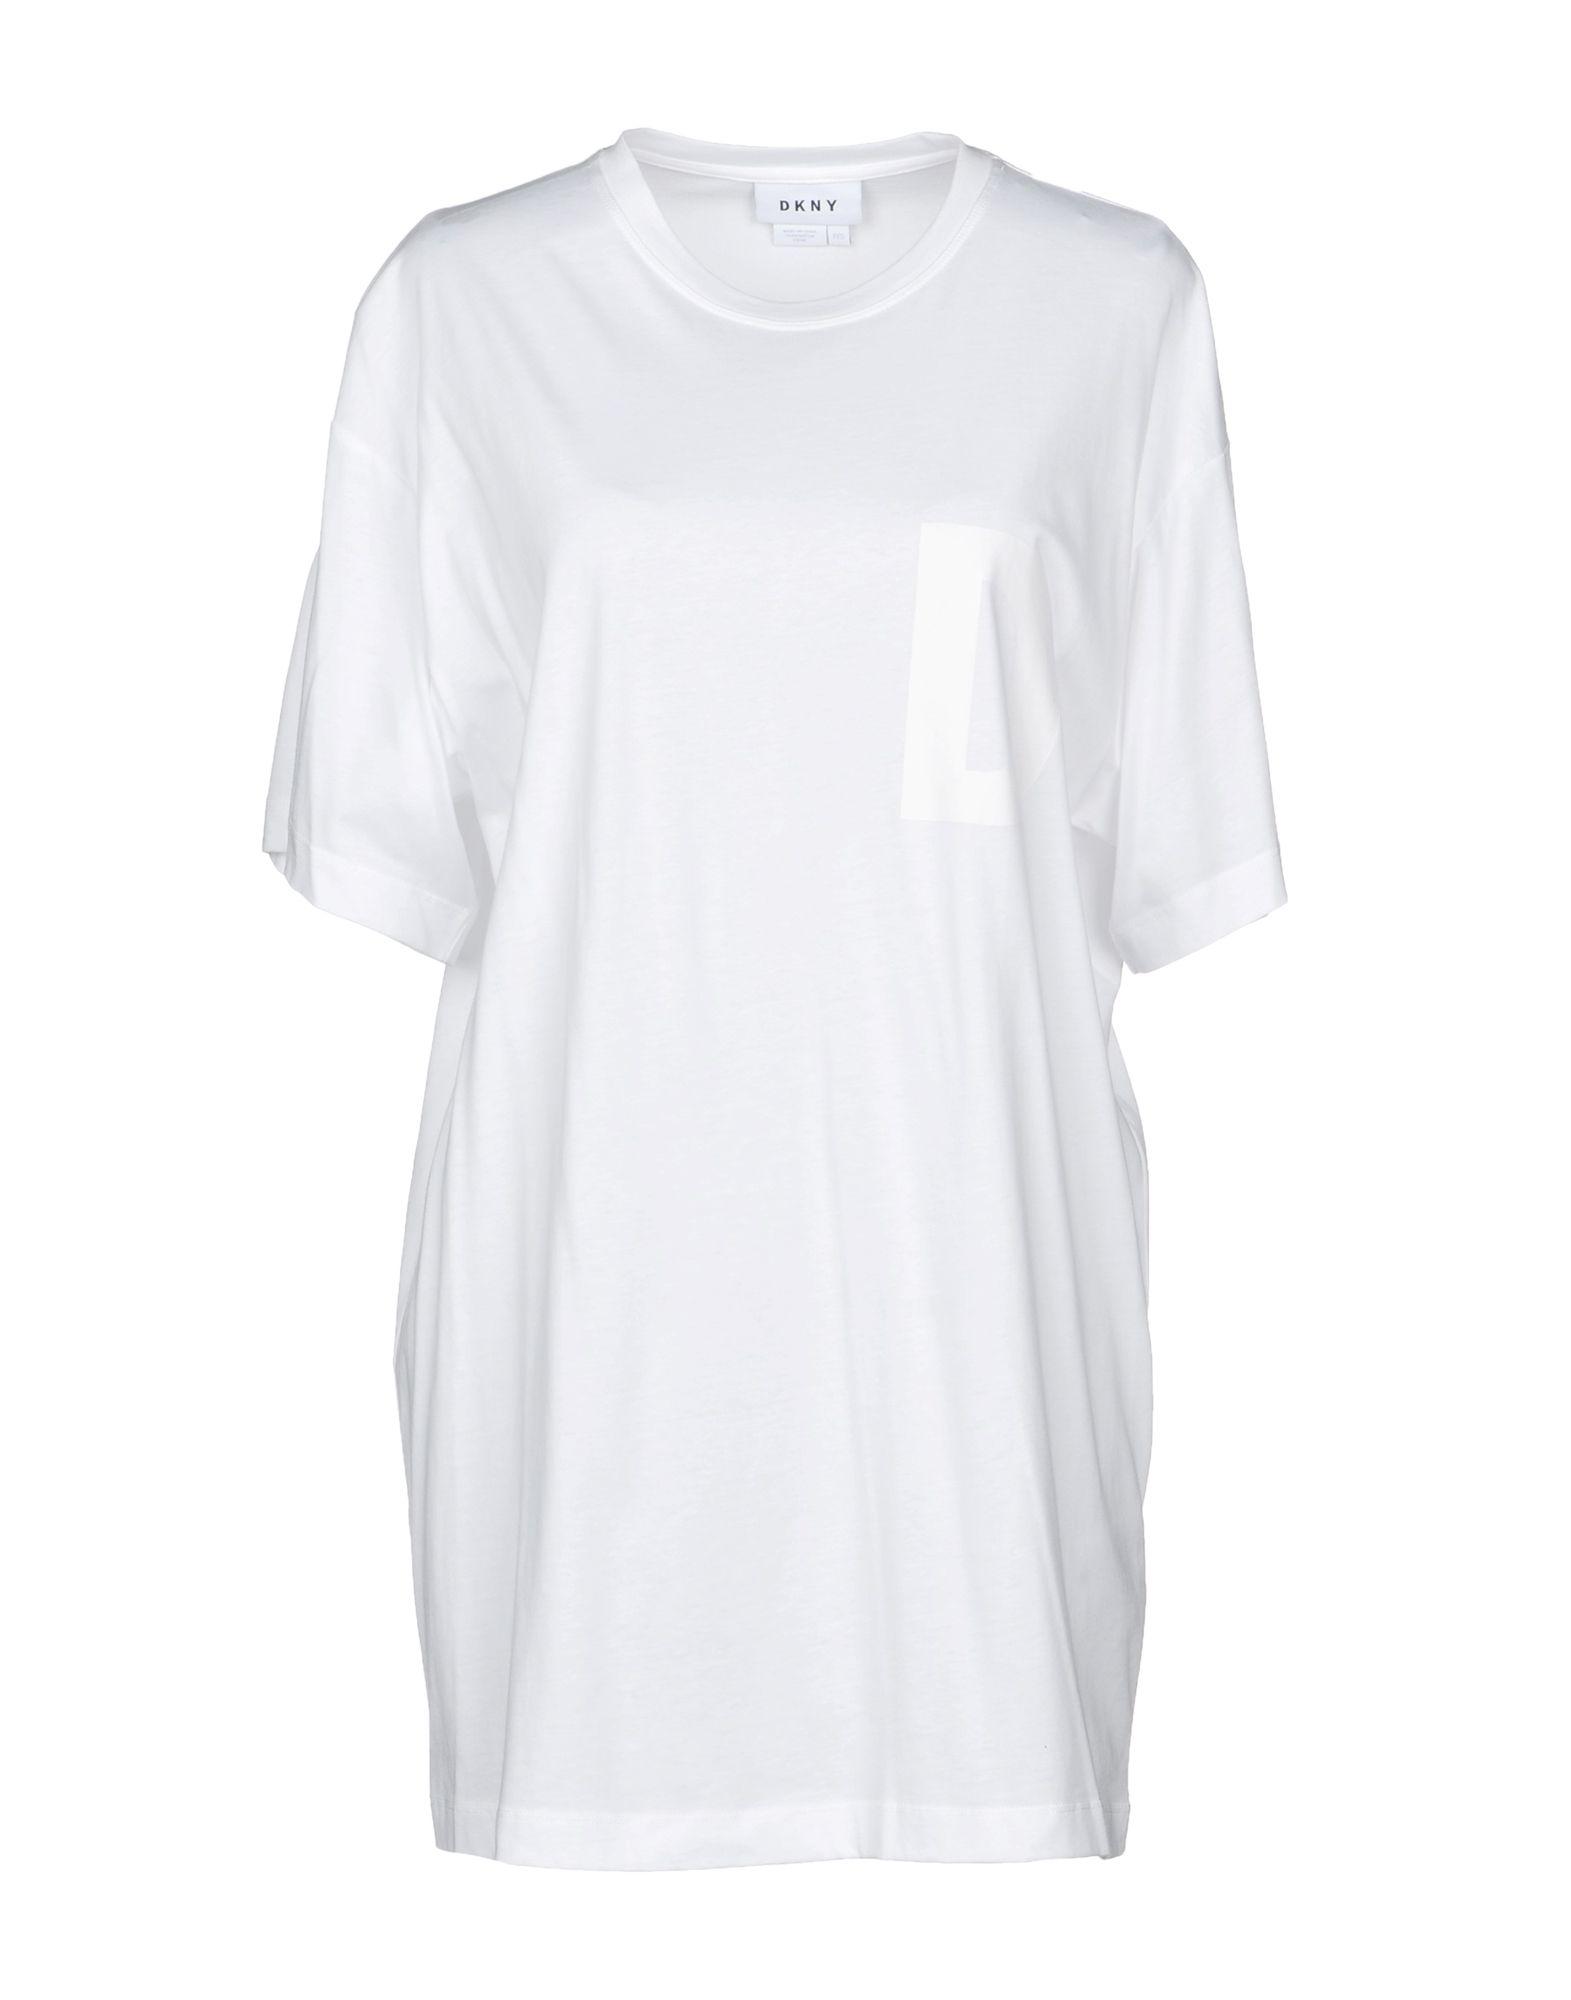 Dkny T-shirts In White | ModeSens